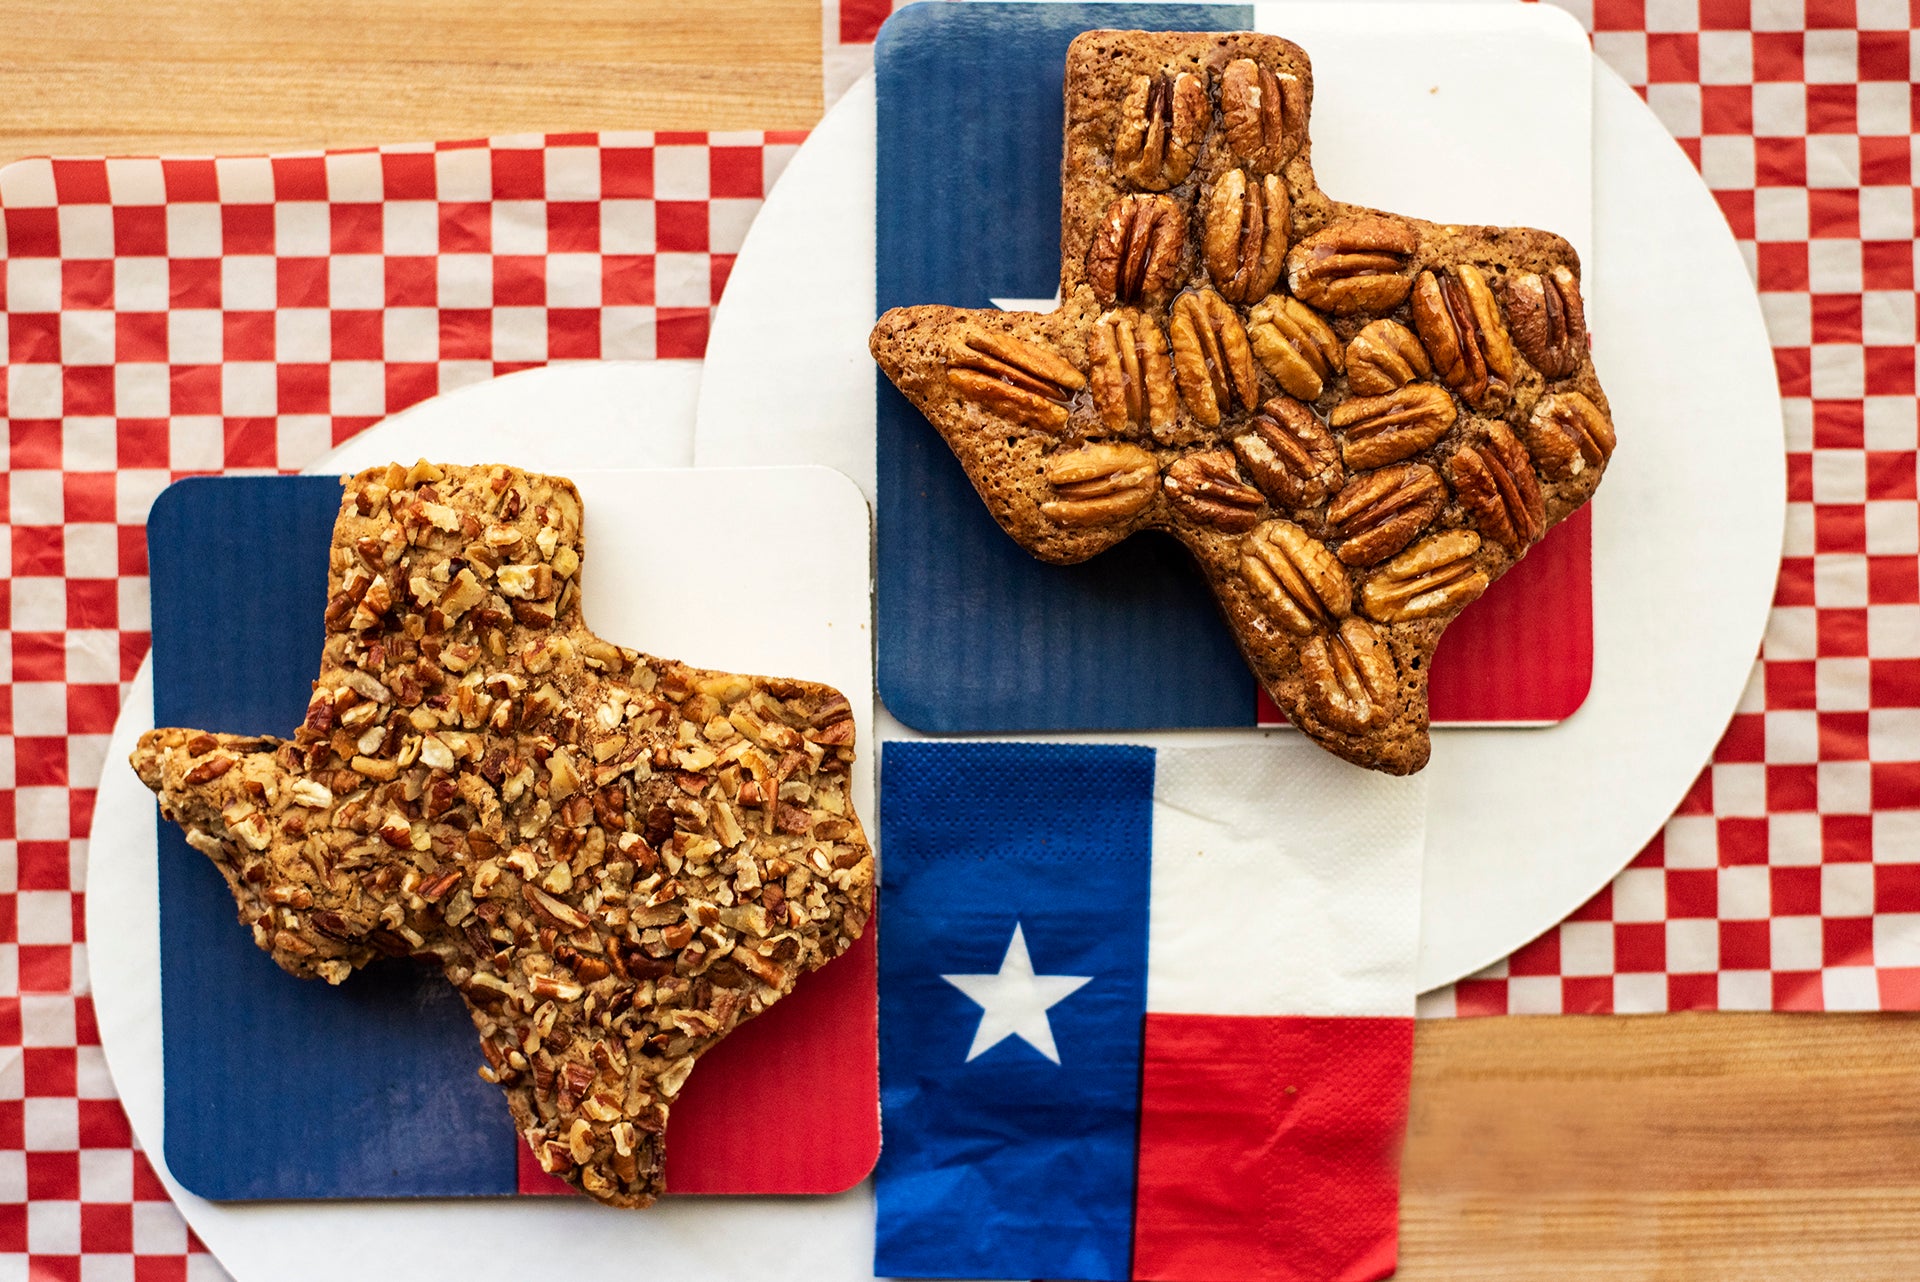 Texas Pecan Cake: A Delectable Twist on Traditional Pecan Desserts